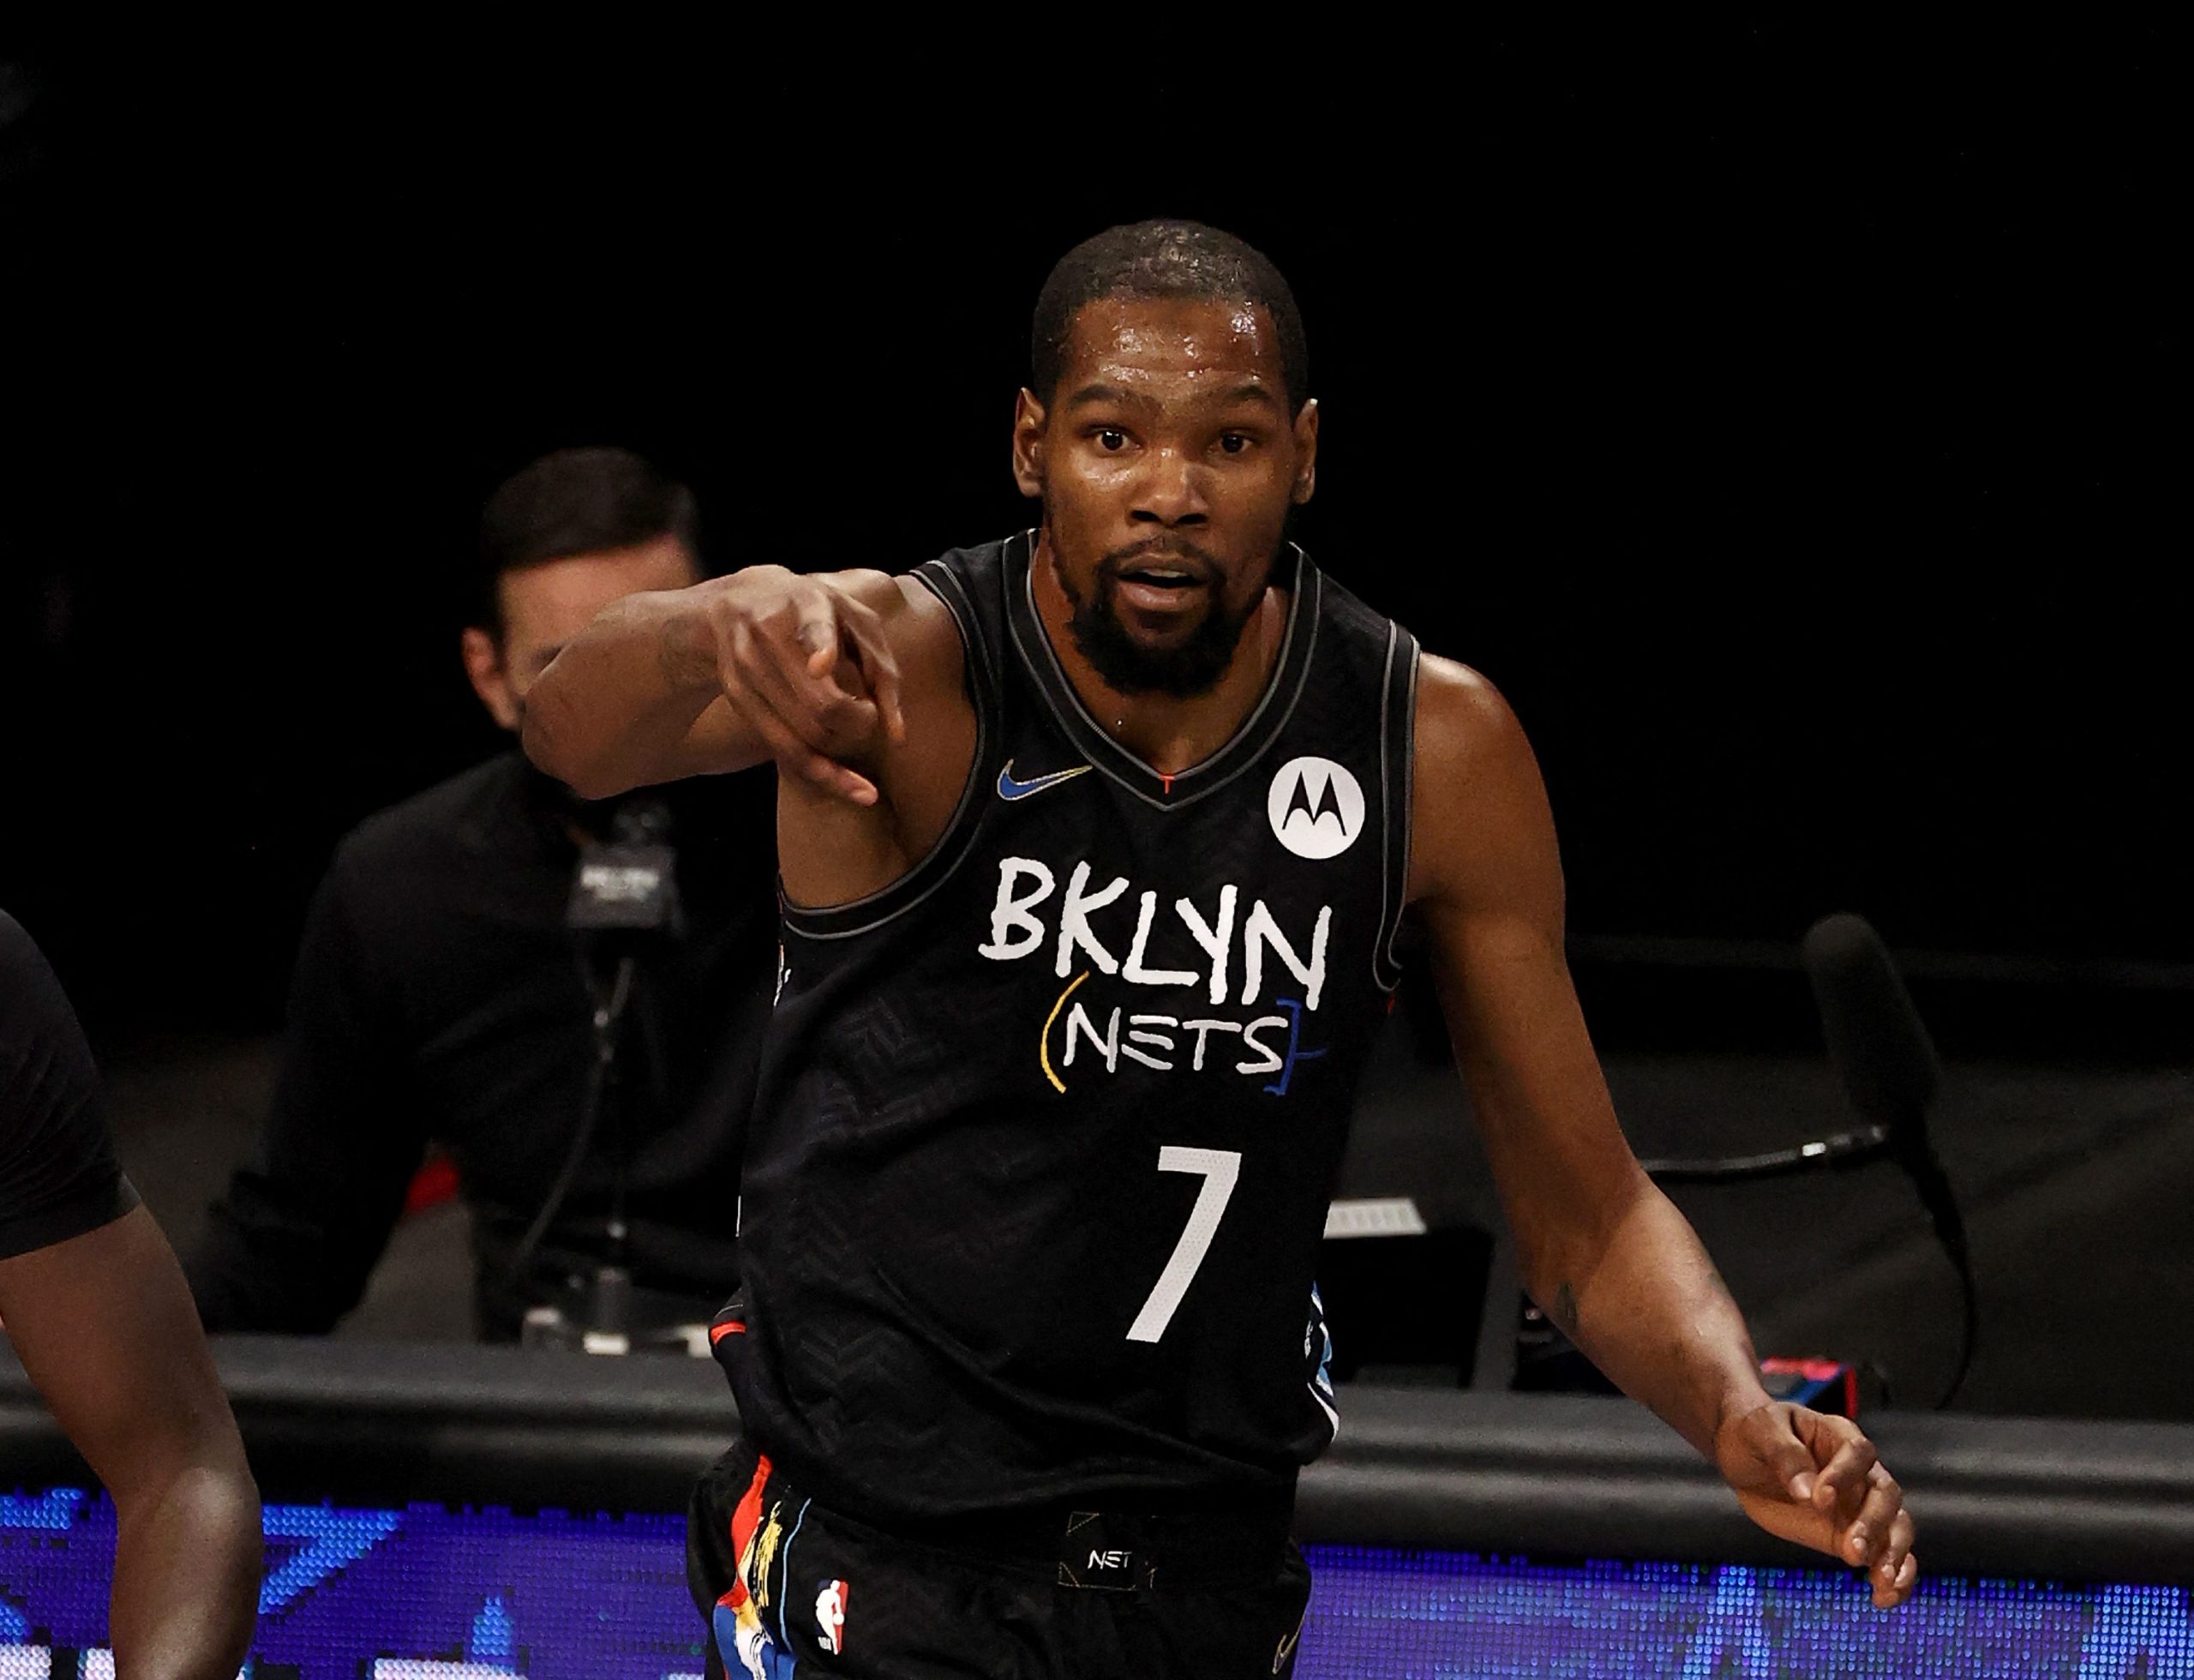 Kevin Durant fined $50,000 by NBA over usage of offensive language